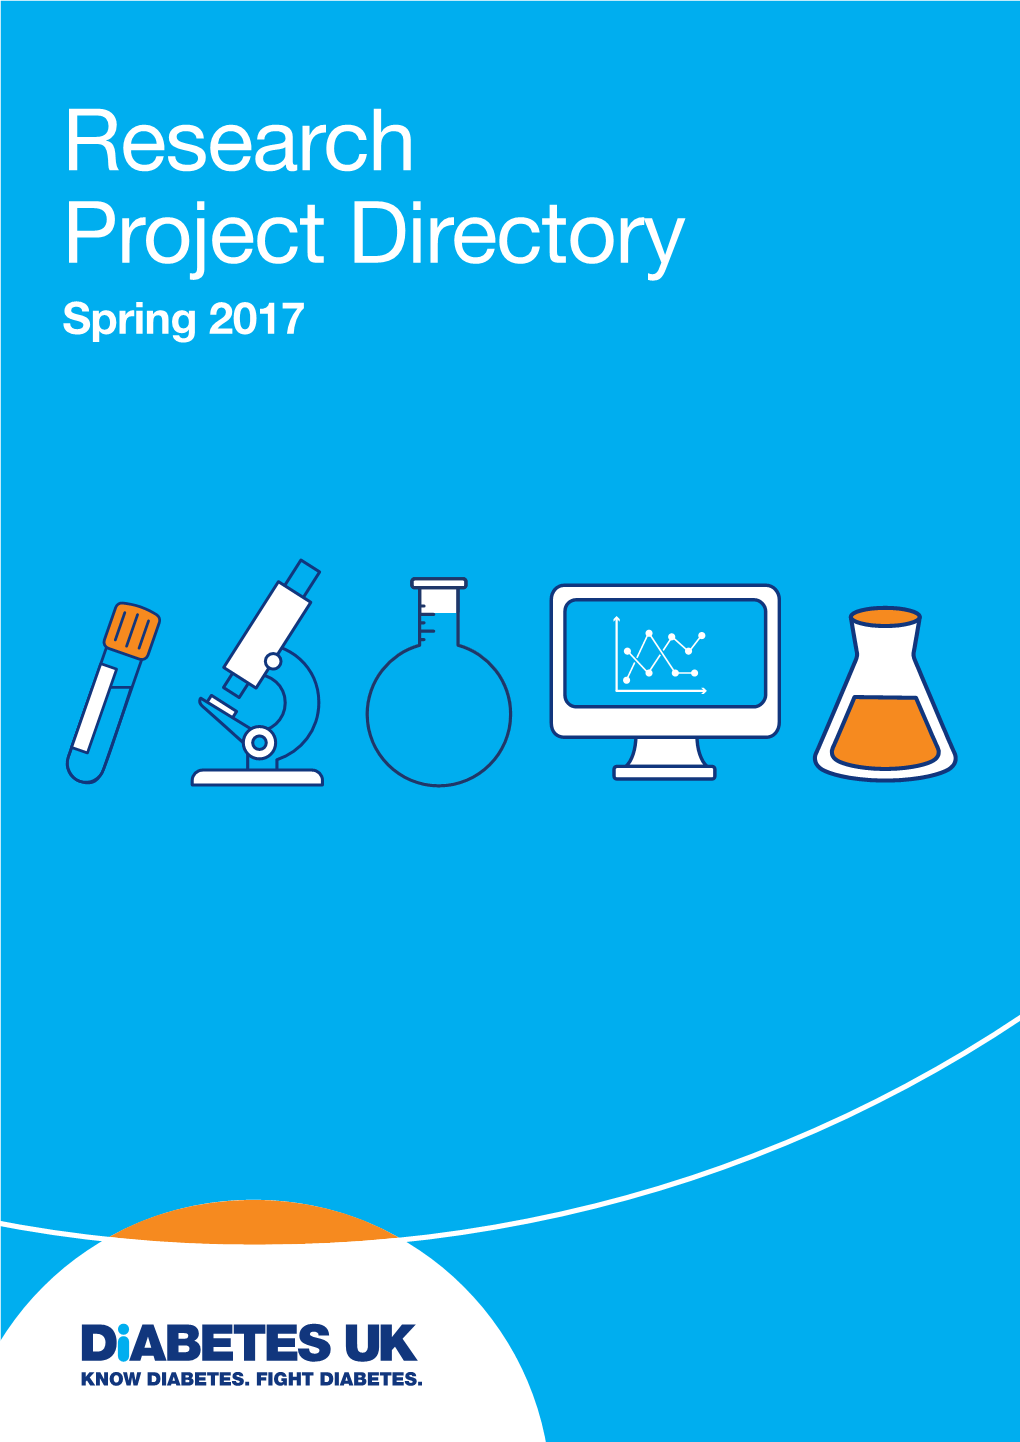 Research Project Directory Spring 2017